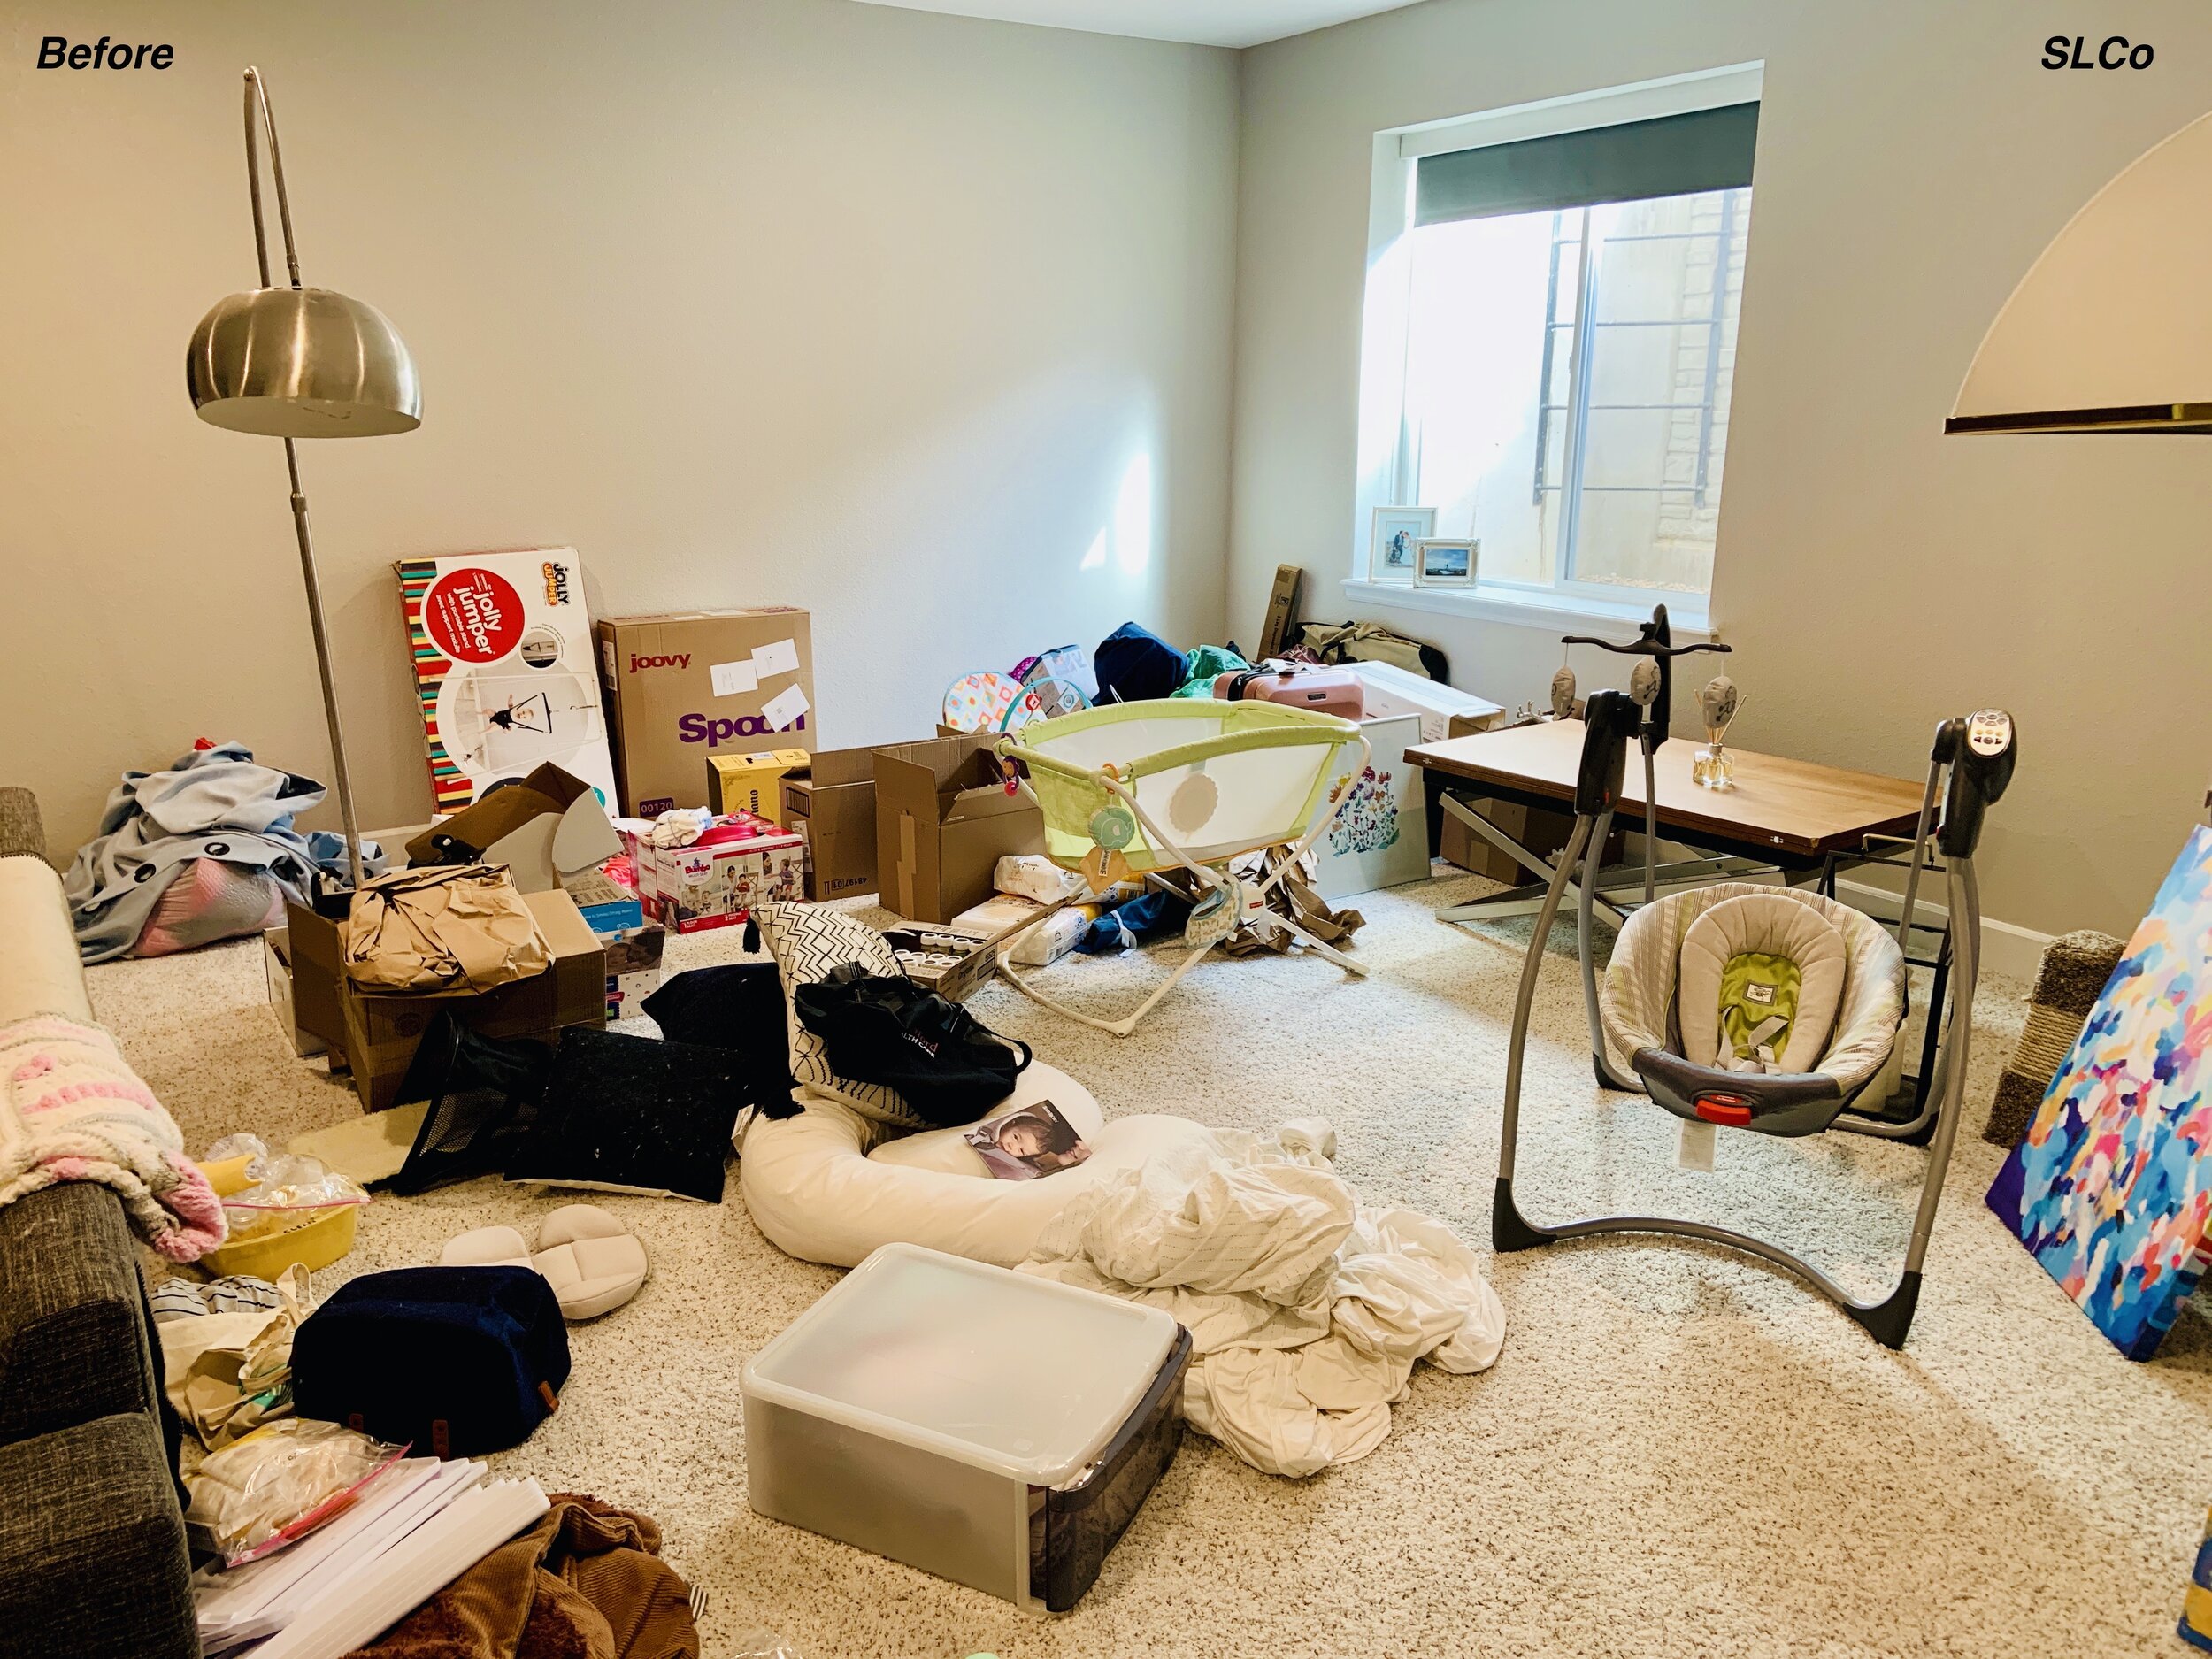 Before photo of large room with pillows, baby items, and other household items filling the whole room.